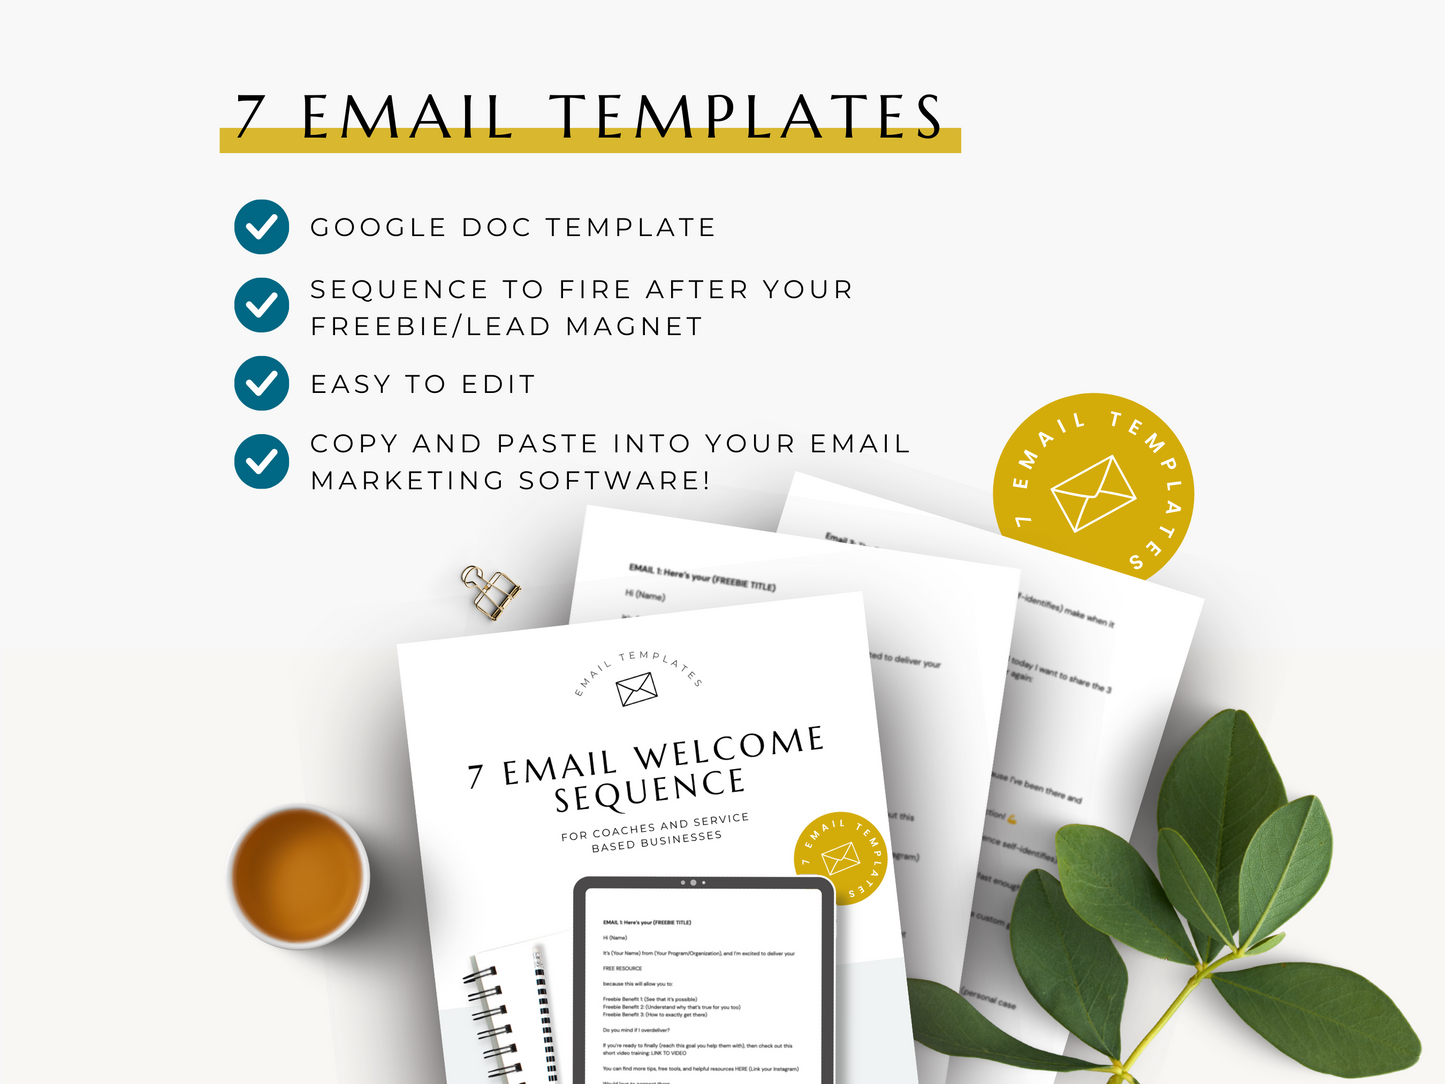 Grow Your Email List Pack